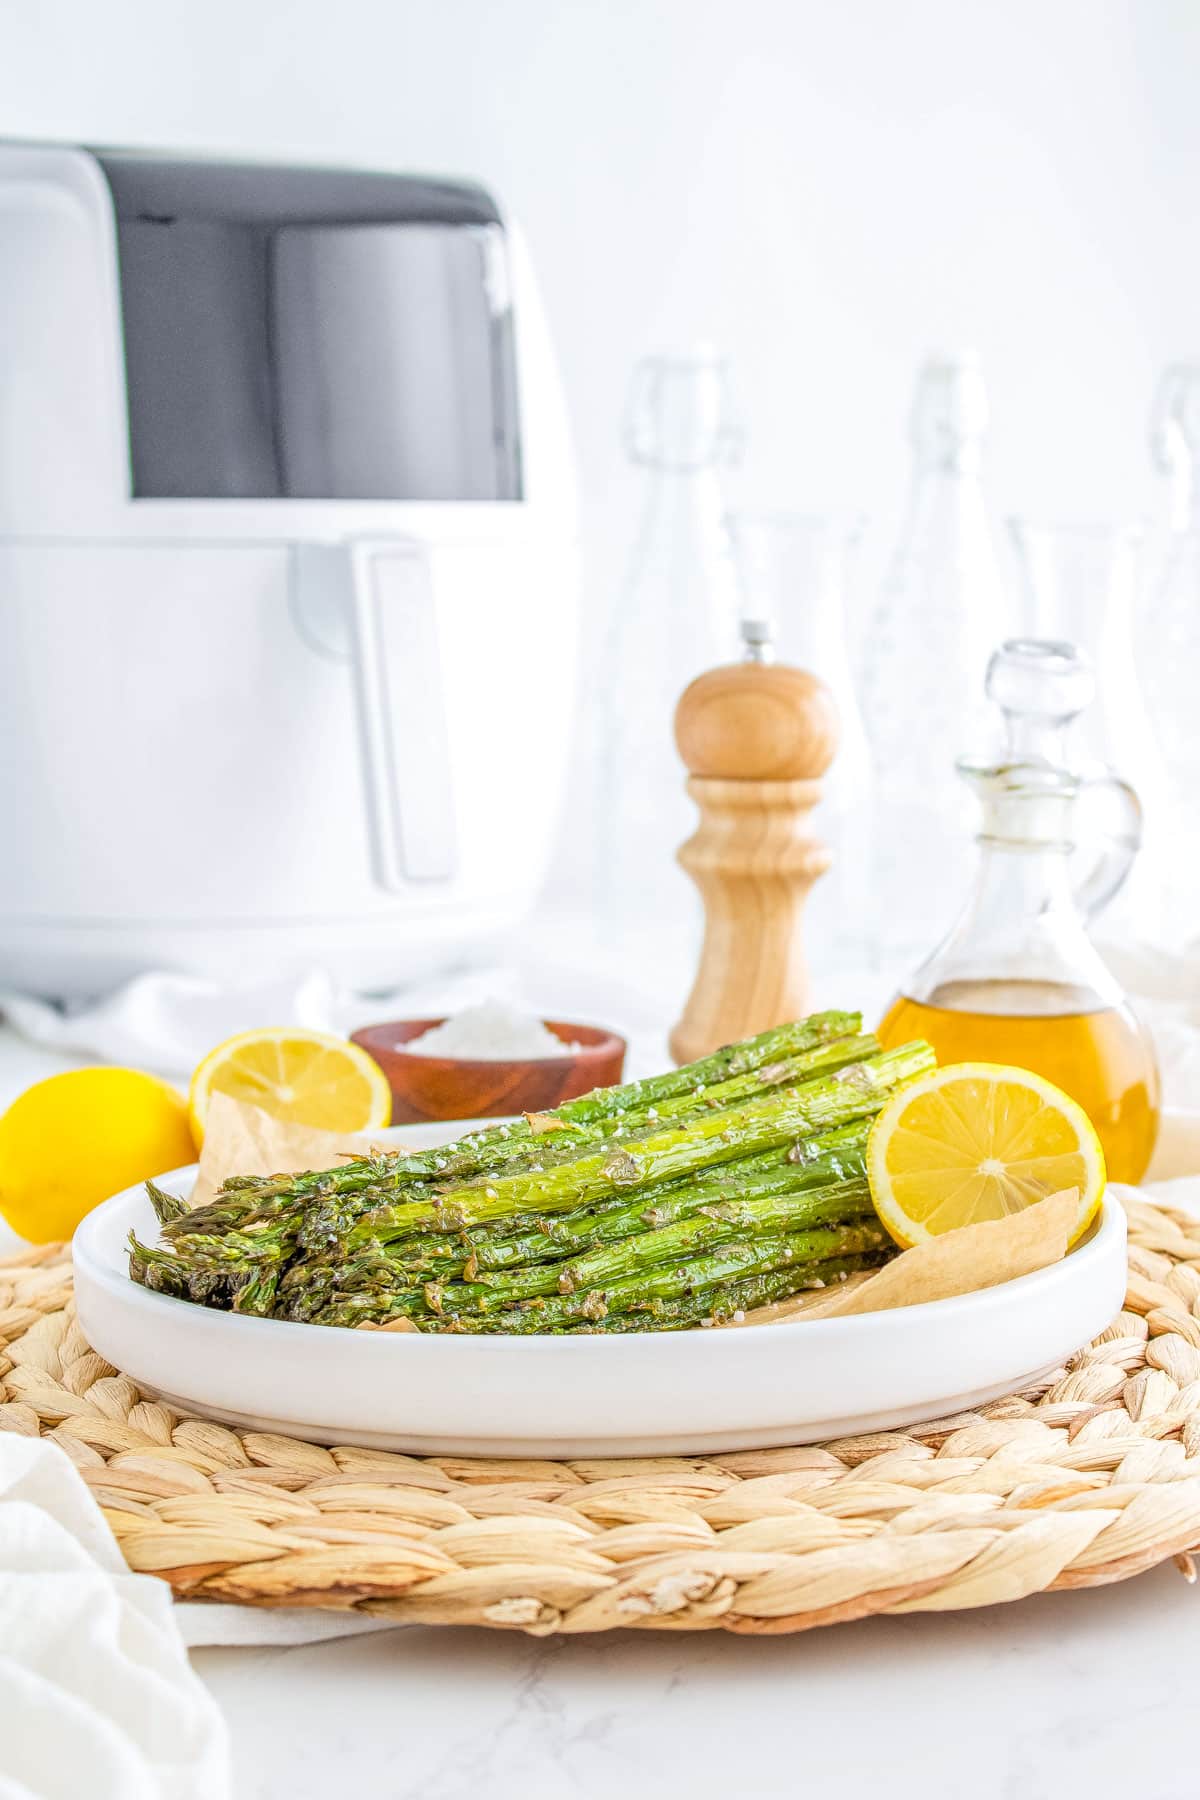 The finished Air Fryer Asparagus on a white platter garnished with lemon wedges.